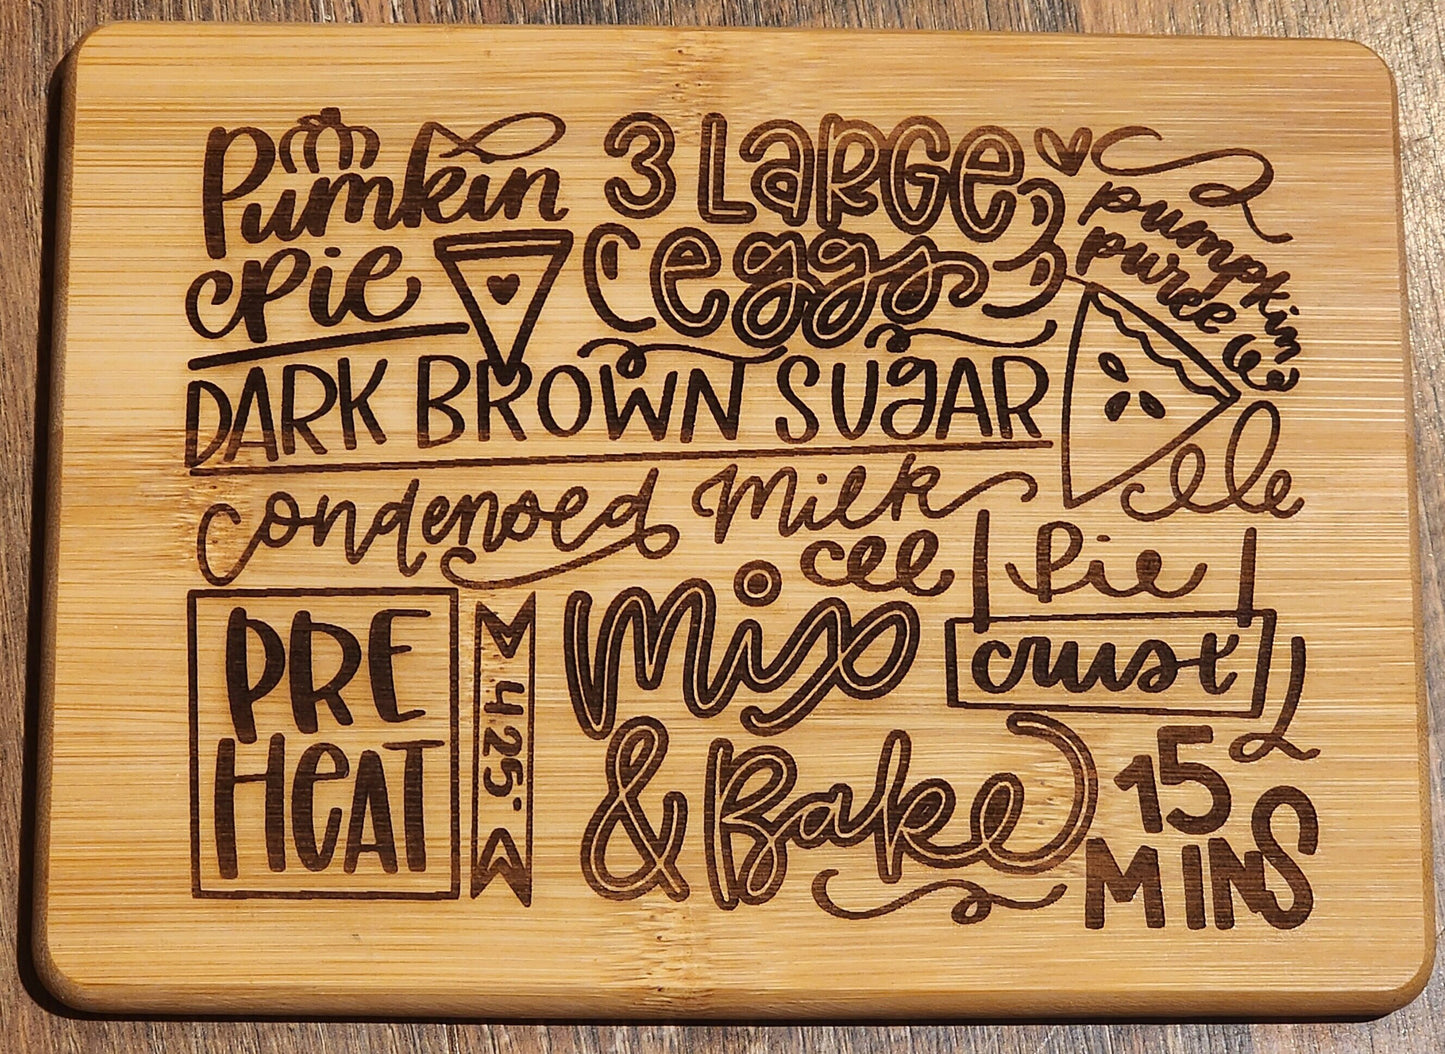 Pumpkin Pie Recipe, country etched Bamboo Wood Cutting Board  - 8.75 x 6.875 inches